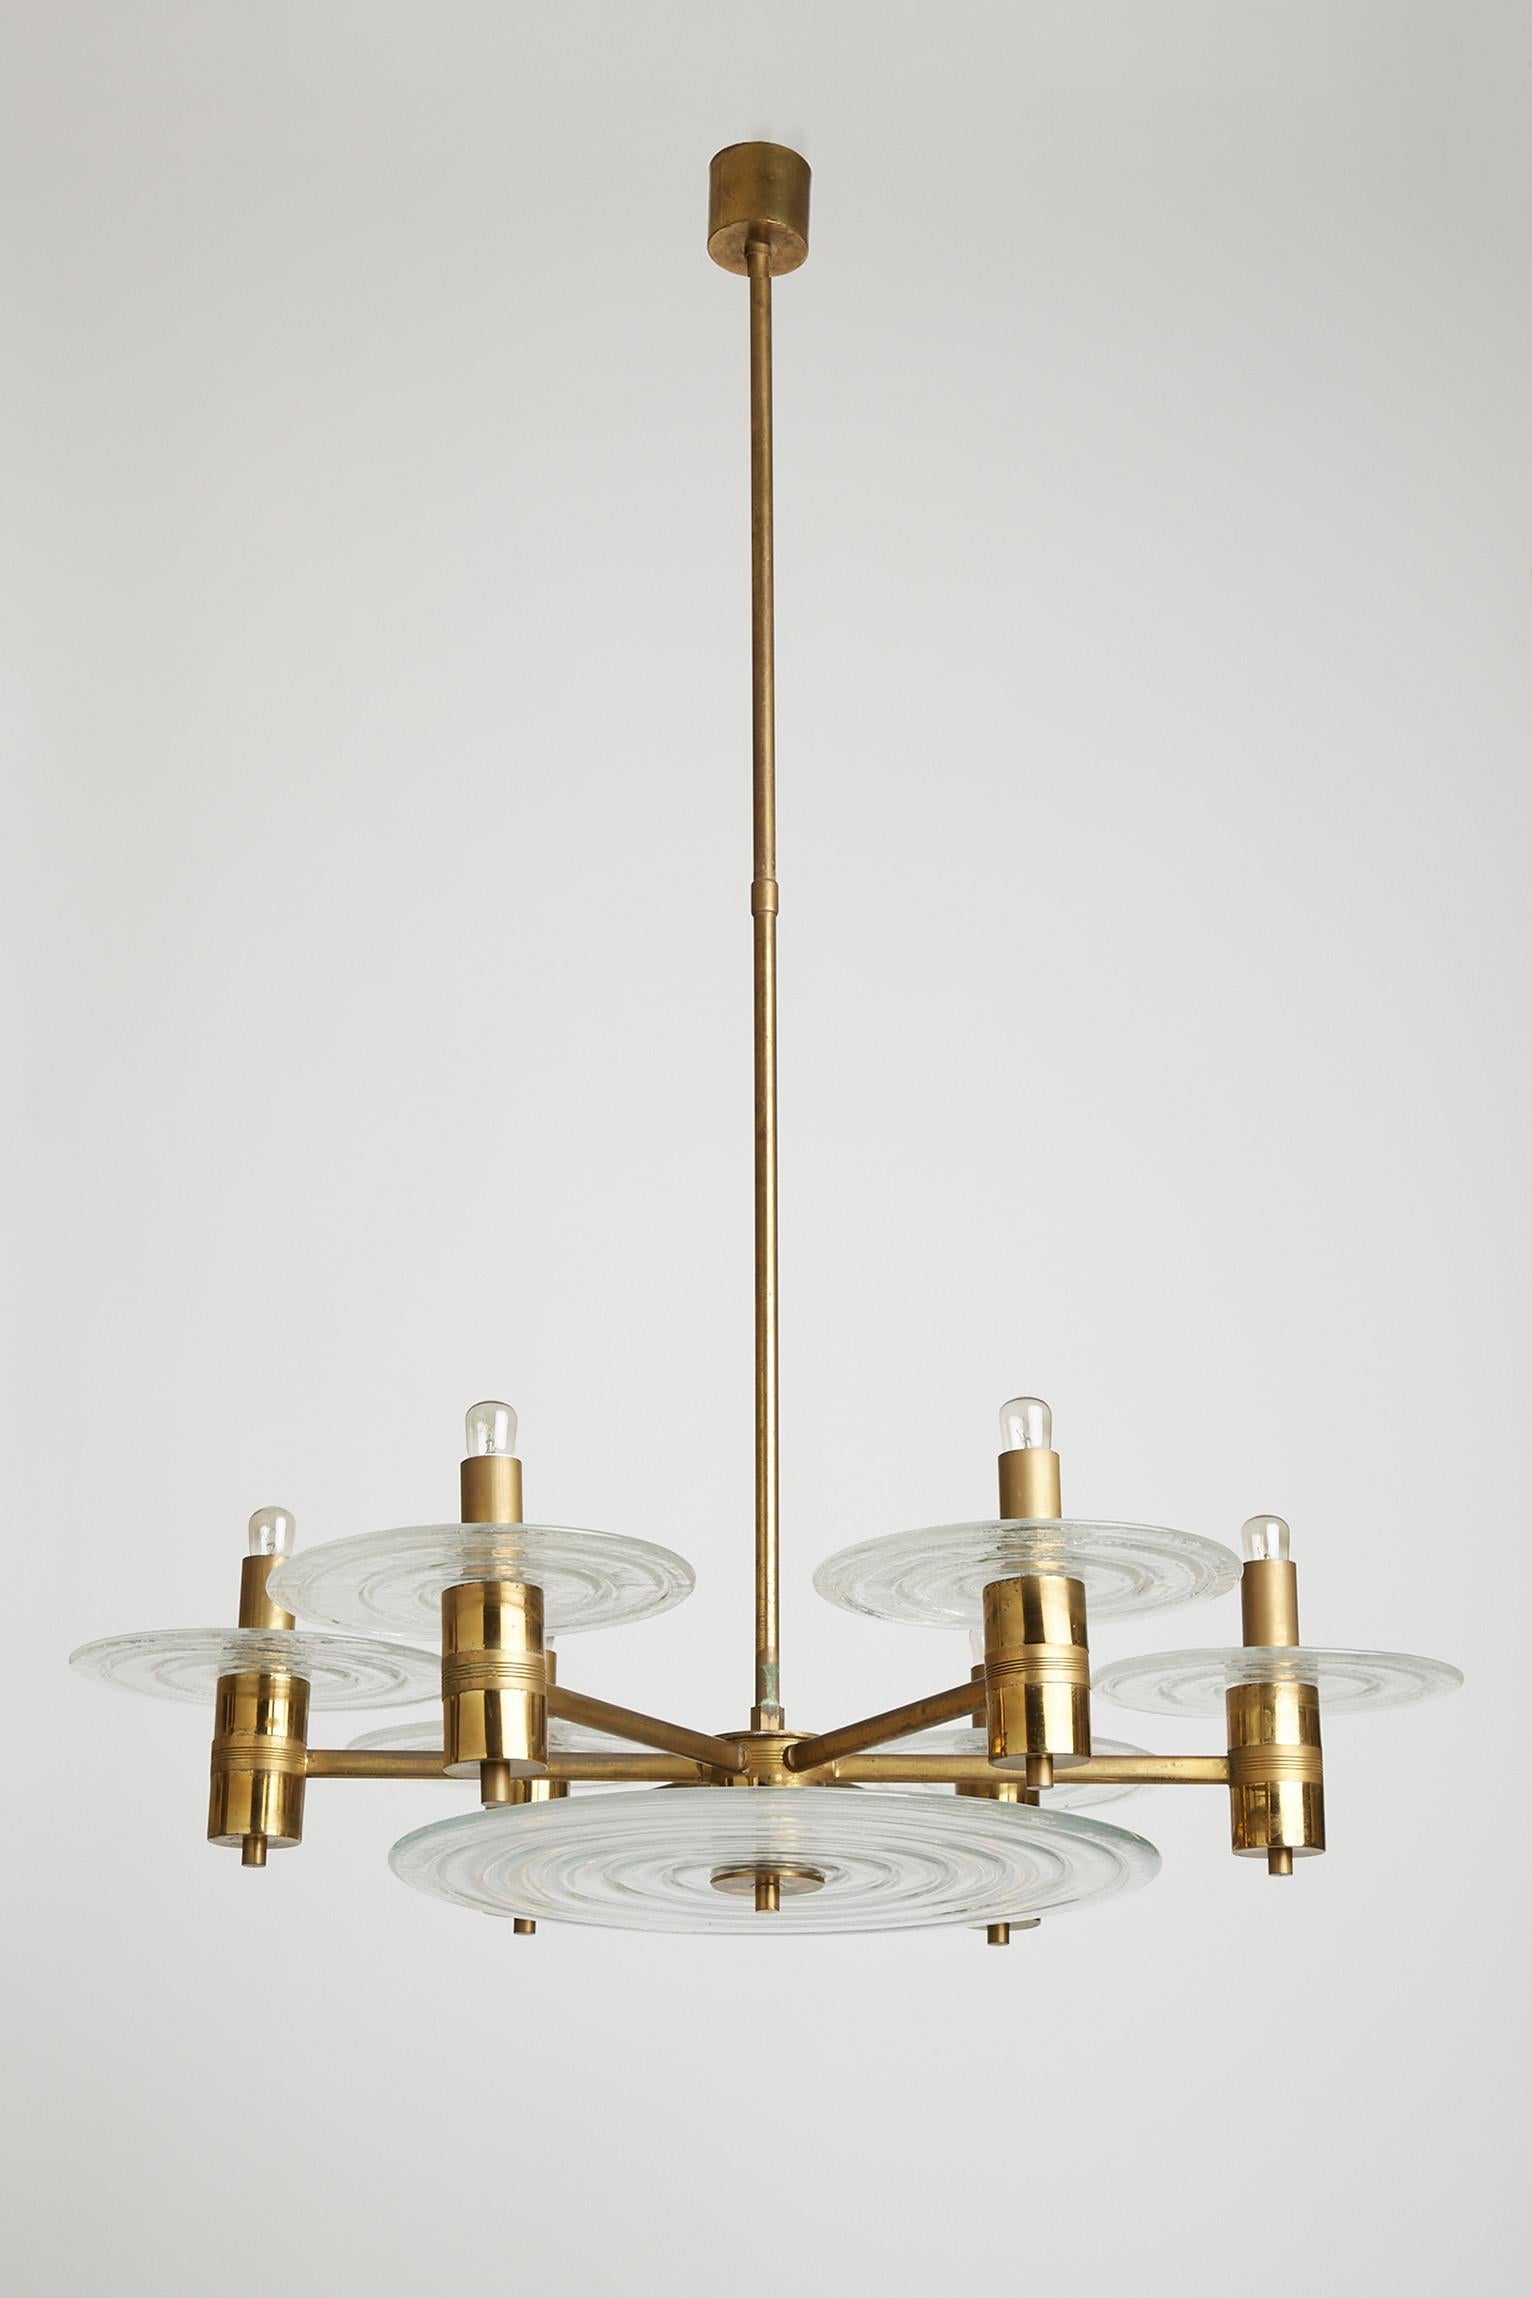 A large Murano glass and brass six armed ceiling light.
Italy, Circa 1950.